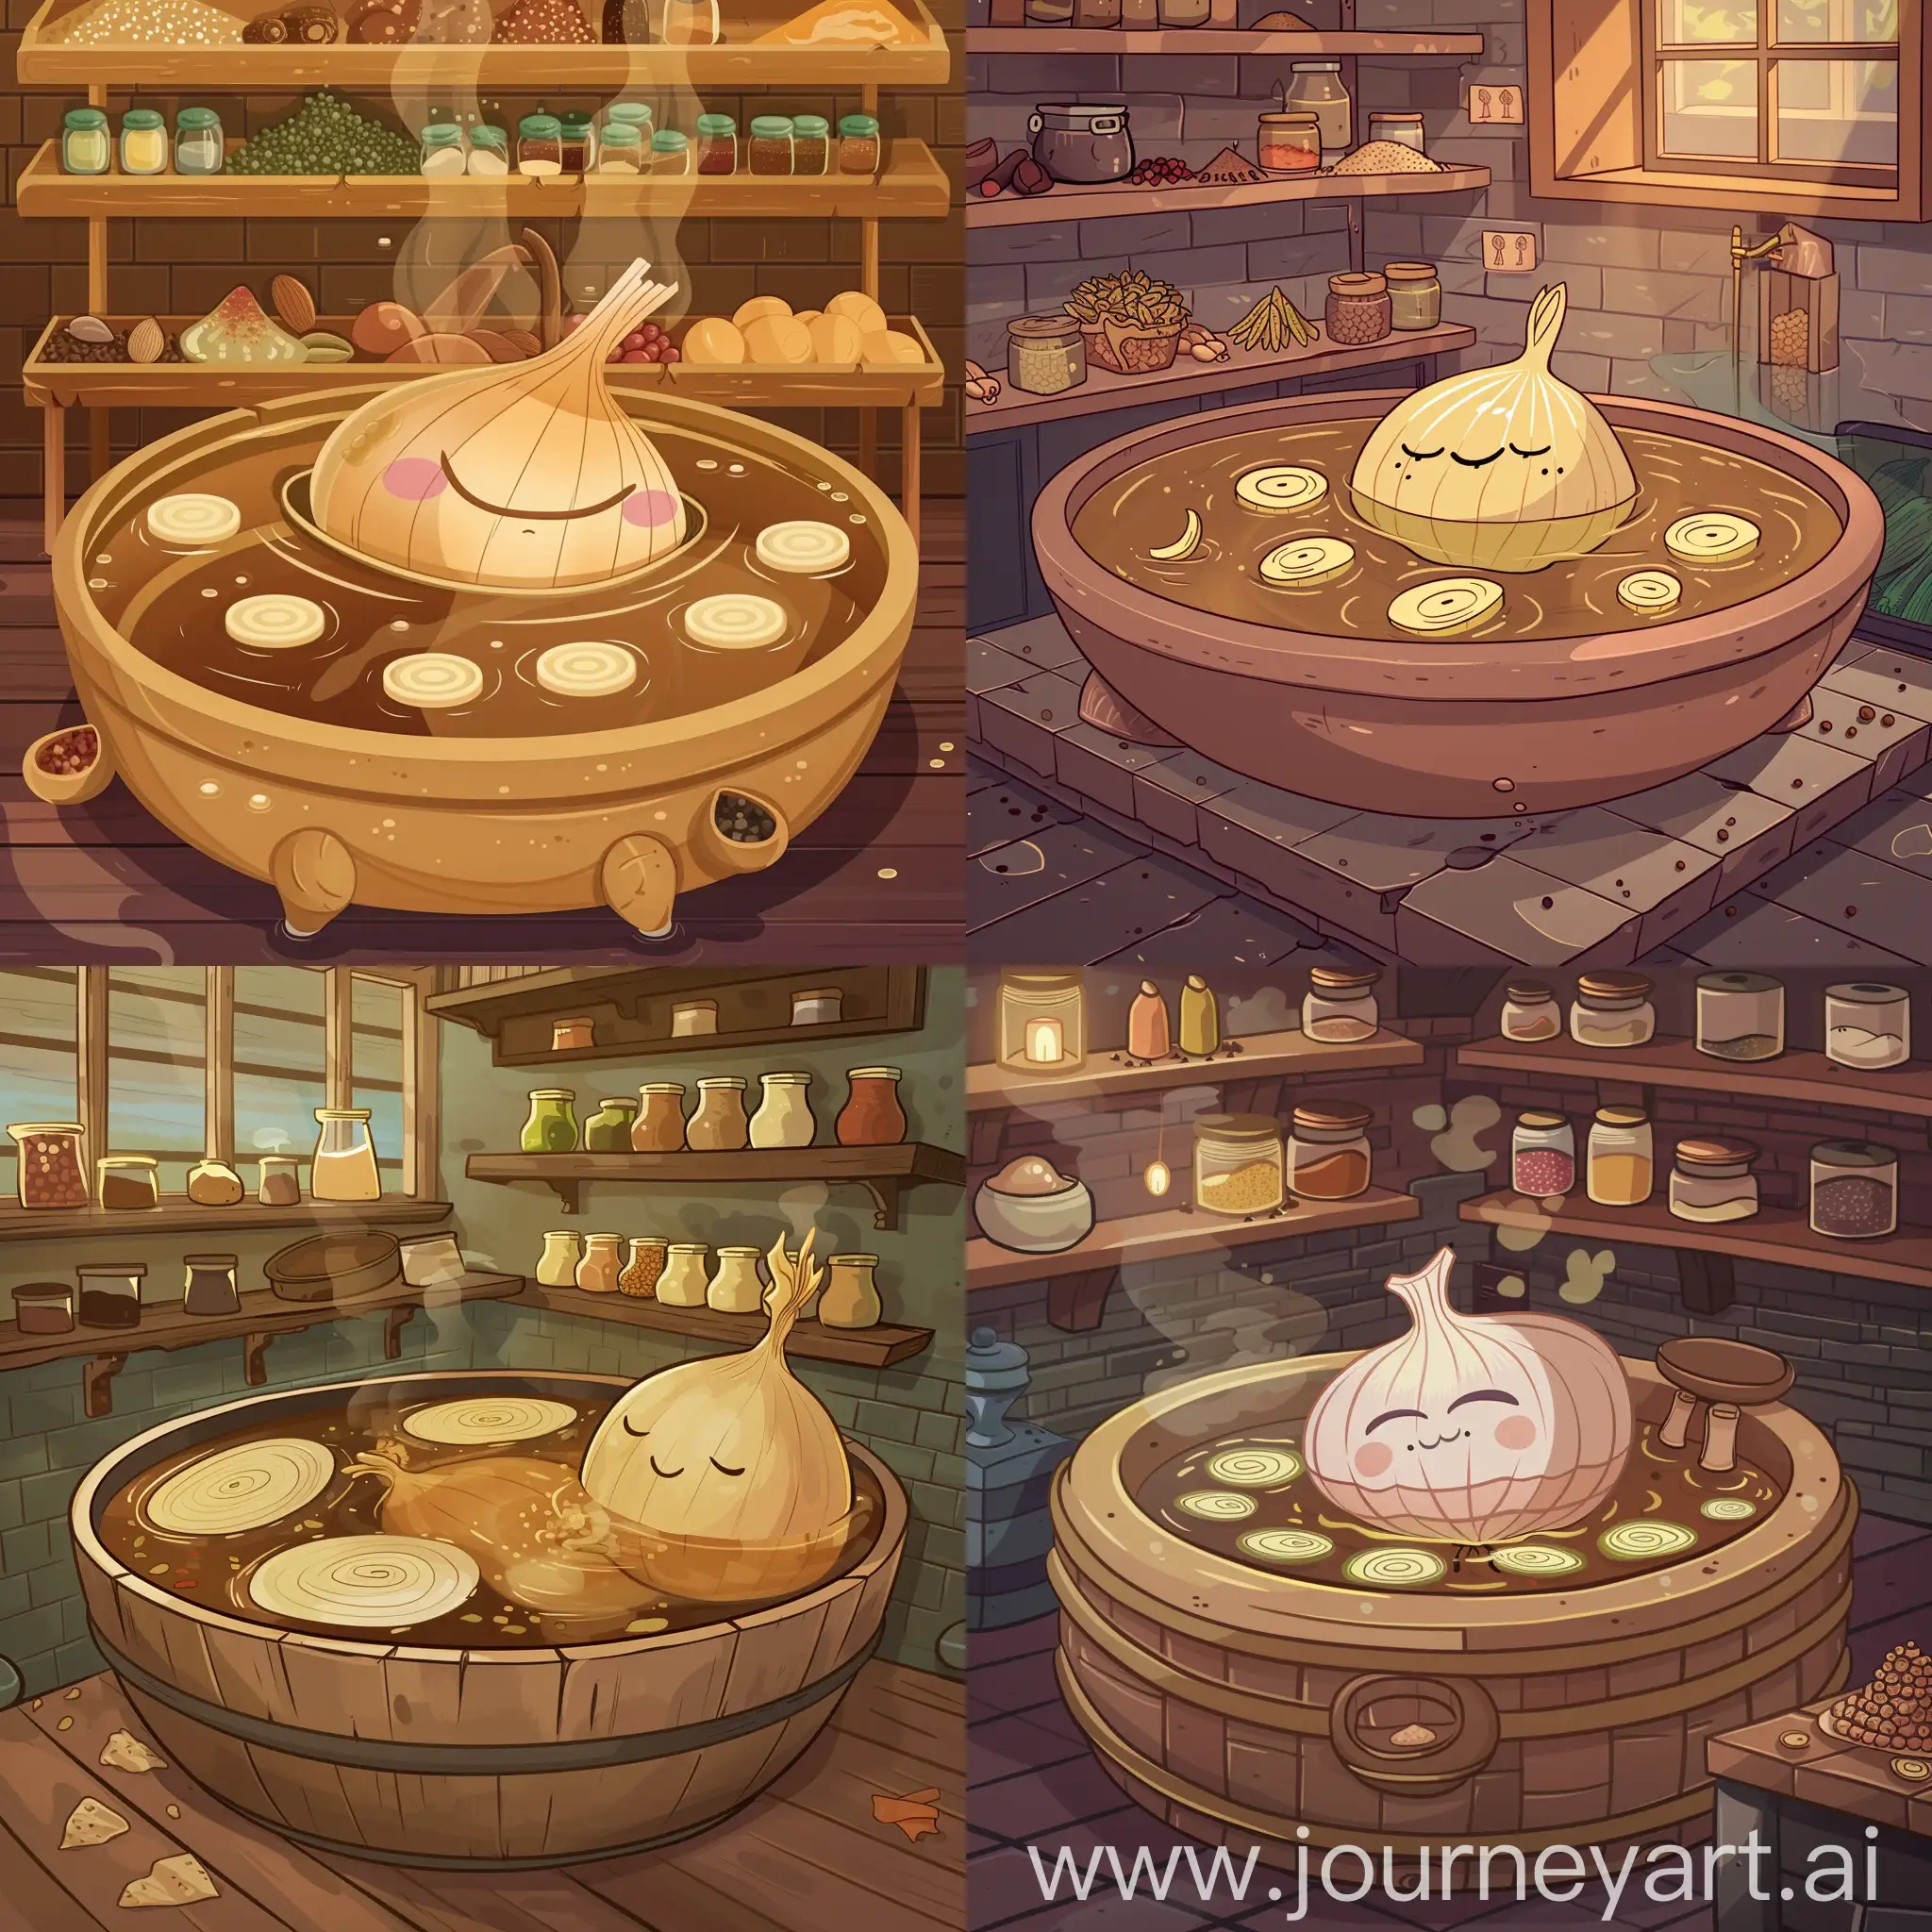 a cartoon image of a relaxed onion with onion slices floating in a hot tub  with brown water and spices on several shelfs, in the style of fantastical environments, otherworldly creatures, luminosity of water, colorful mindscapes, detailed character design